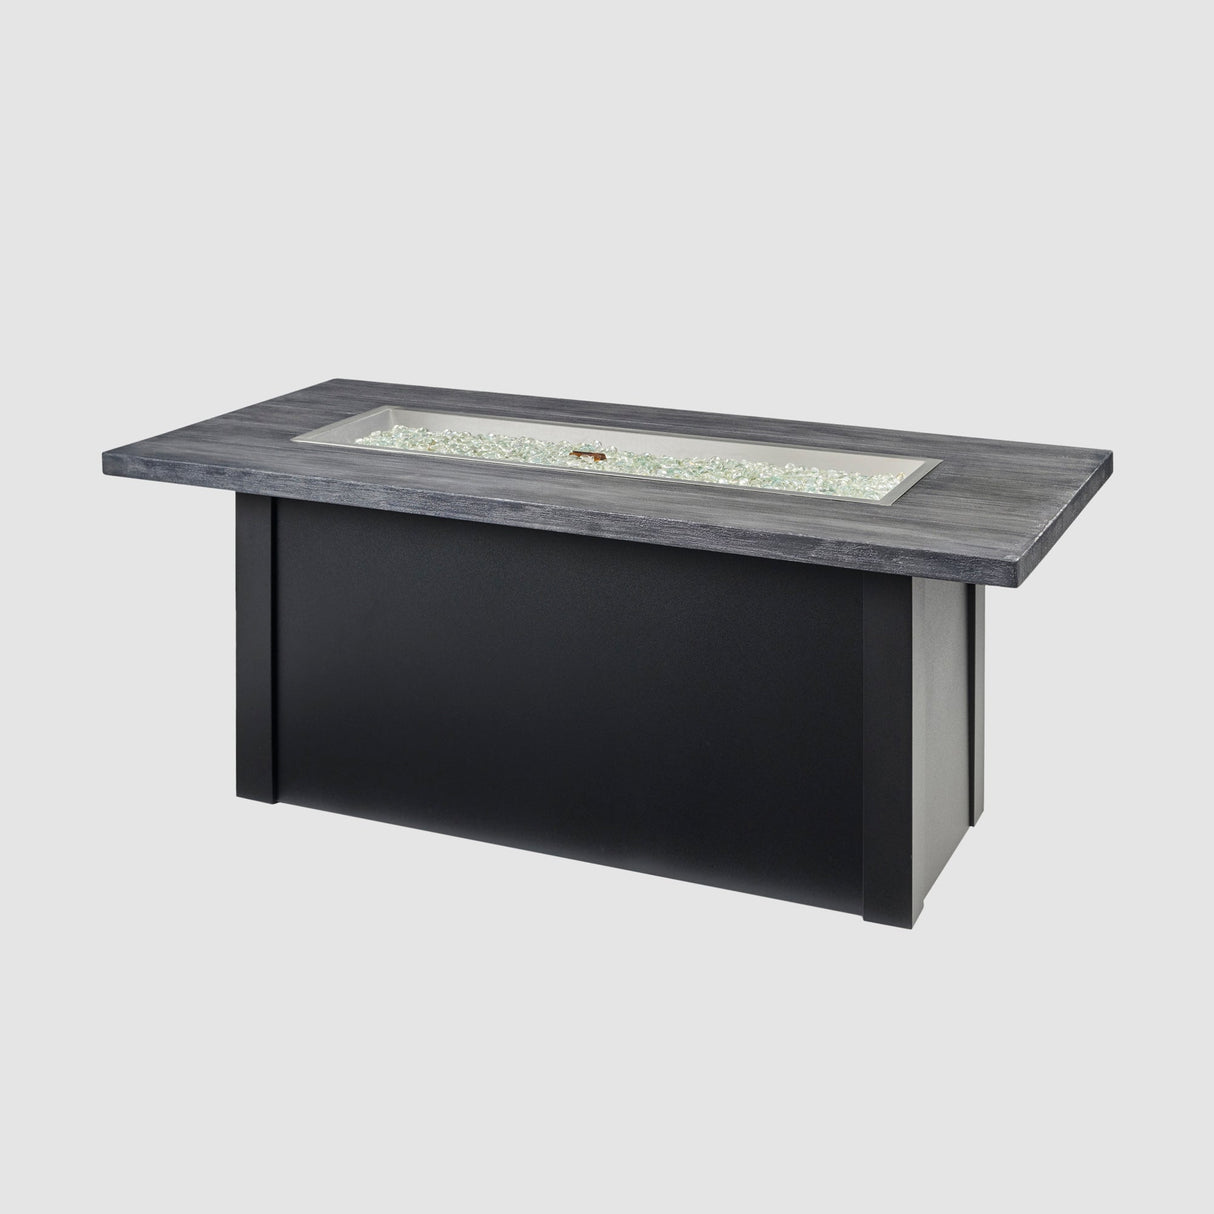 Fire gems placed on the burner of a Havenwood Linear Gas Fire Pit Table with a Carbon Grey top and Luverne Black base